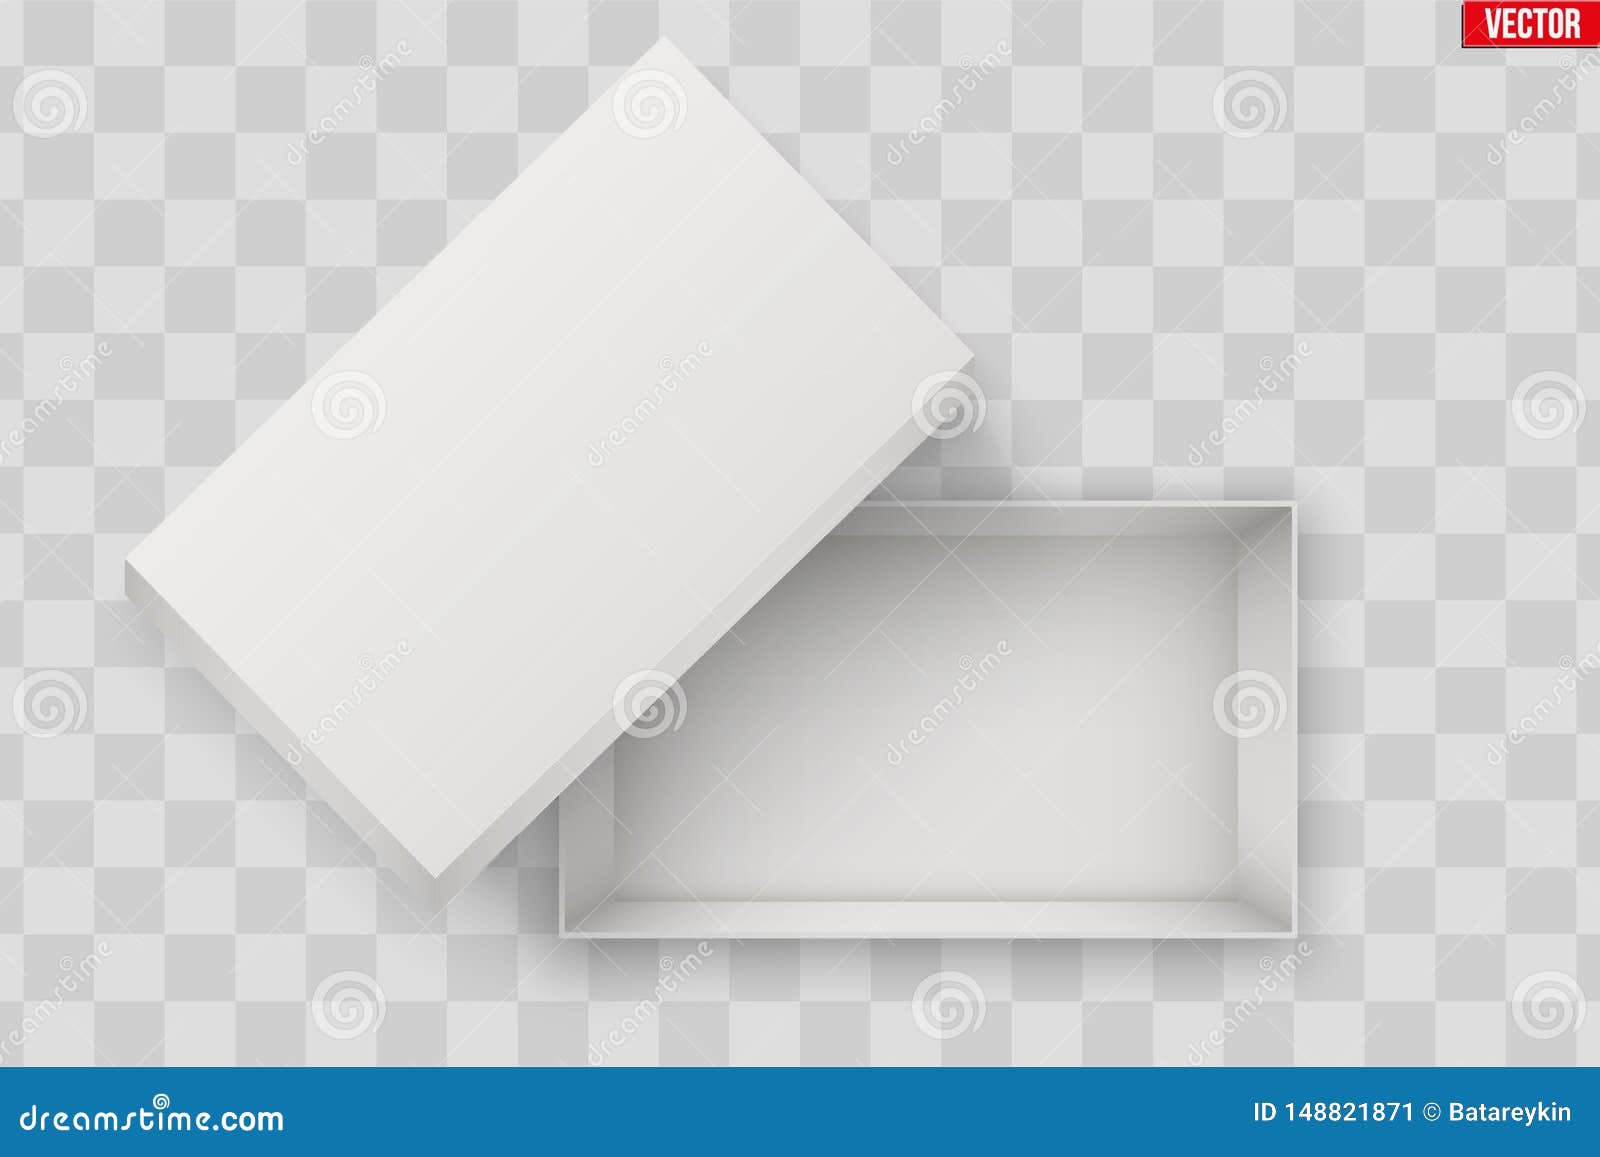 Download Blank Of Open White Shoe Box Stock Vector - Illustration ...